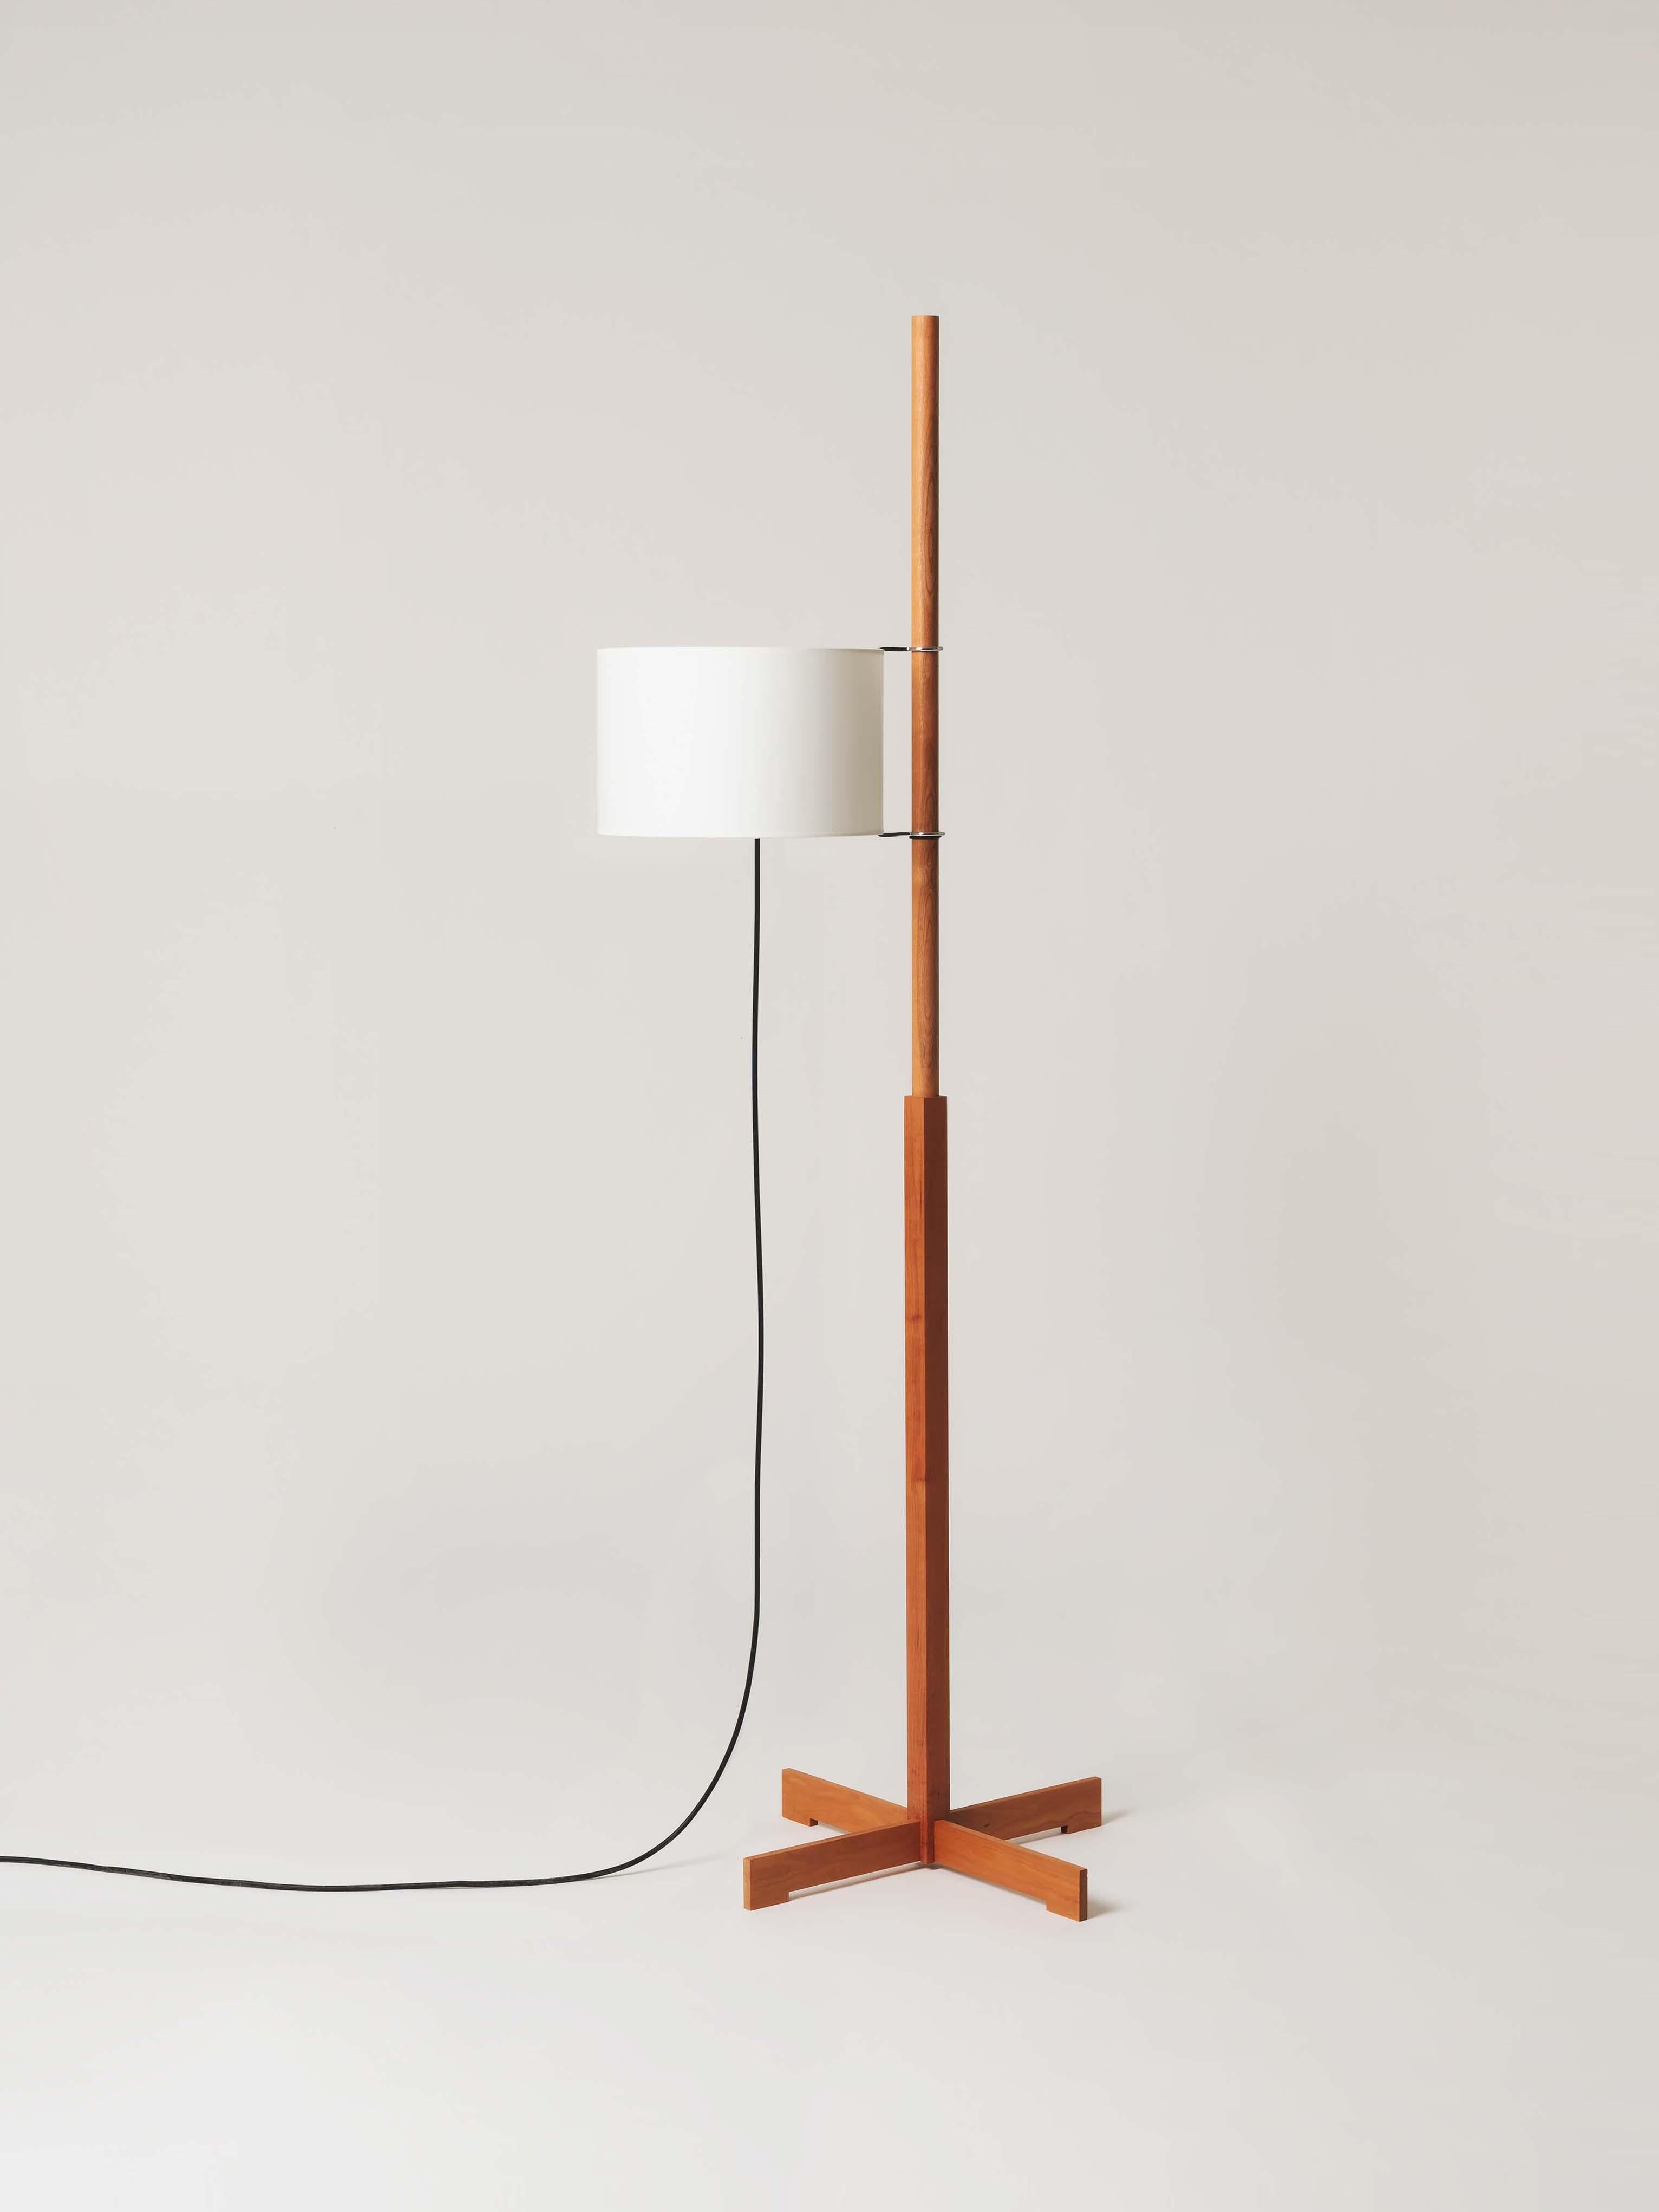 White and cherry TMM floor lamp by Miguel Milá
Dimensions: D 50 x W 60 x H 166 cm
Materials: Cherry wood, parchment lampshade.
Available in 3 lampshades: beige, white and white with diffuser.
Available in 5 woods: beech, cherry, walnut, natural